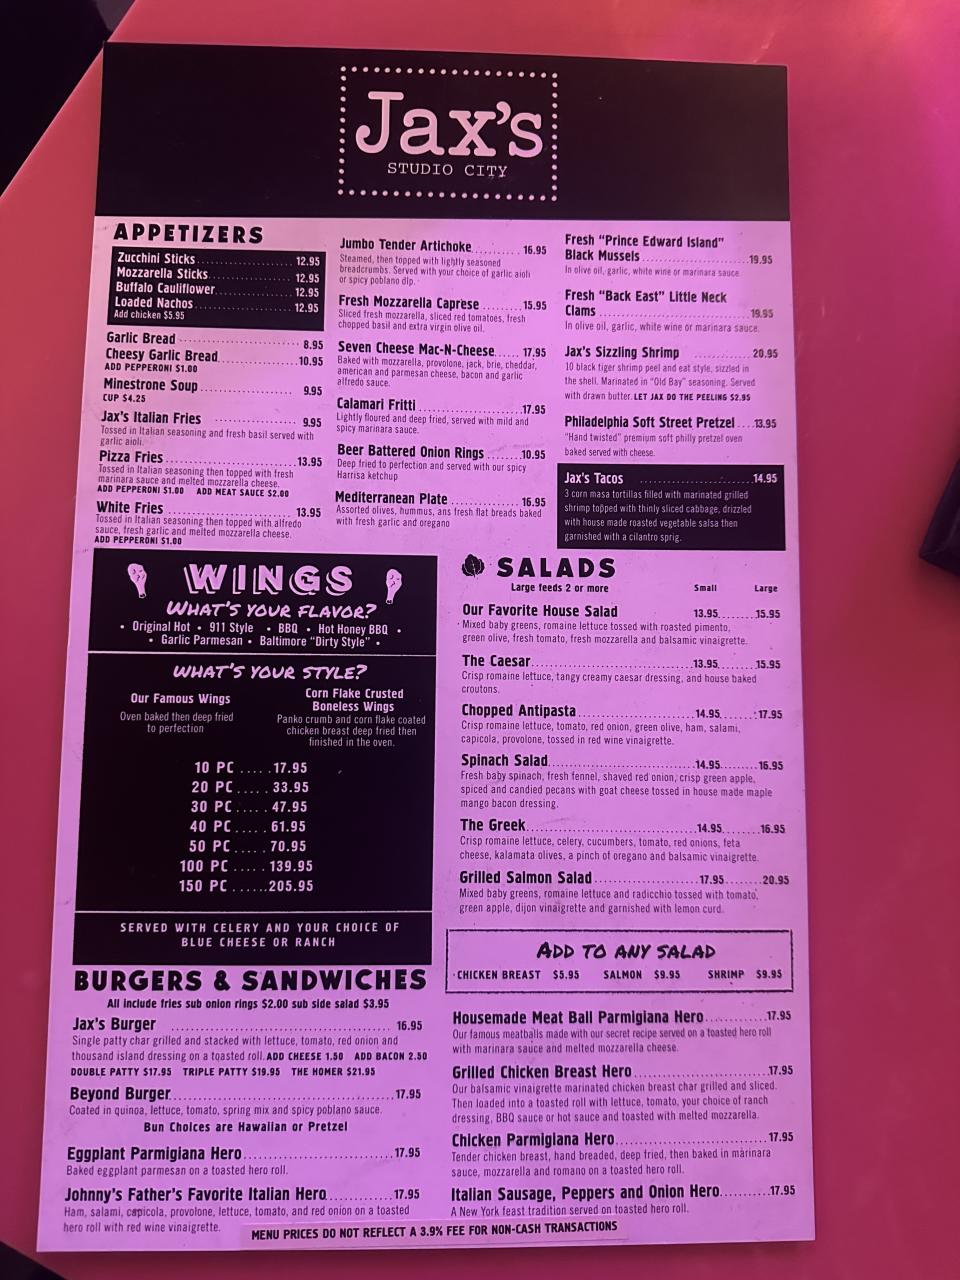 Menu from Jack's Studio City featuring appetizers, wings, salads, burgers, sandwiches, and specialty items